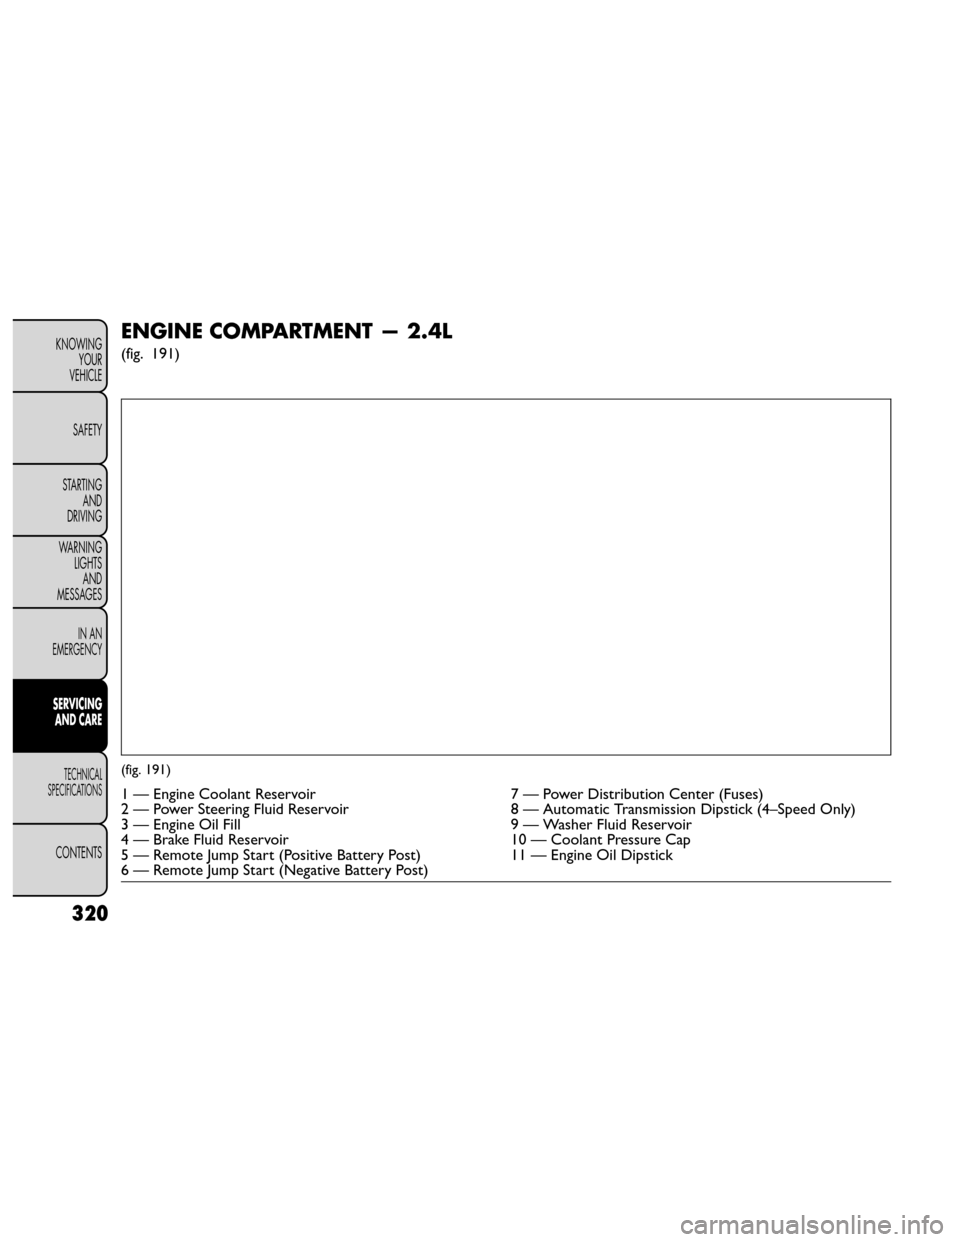 FIAT FREEMONT 2014 1.G Owners Manual ENGINE COMPARTMENT — 2.4L
(fig. 191)
(fig. 191)
1 — Engine Coolant Reservoir7 — Power Distribution Center (Fuses)
2 — Power Steering Fluid Reservoir 8 — Automatic Transmission Dipstick (4–